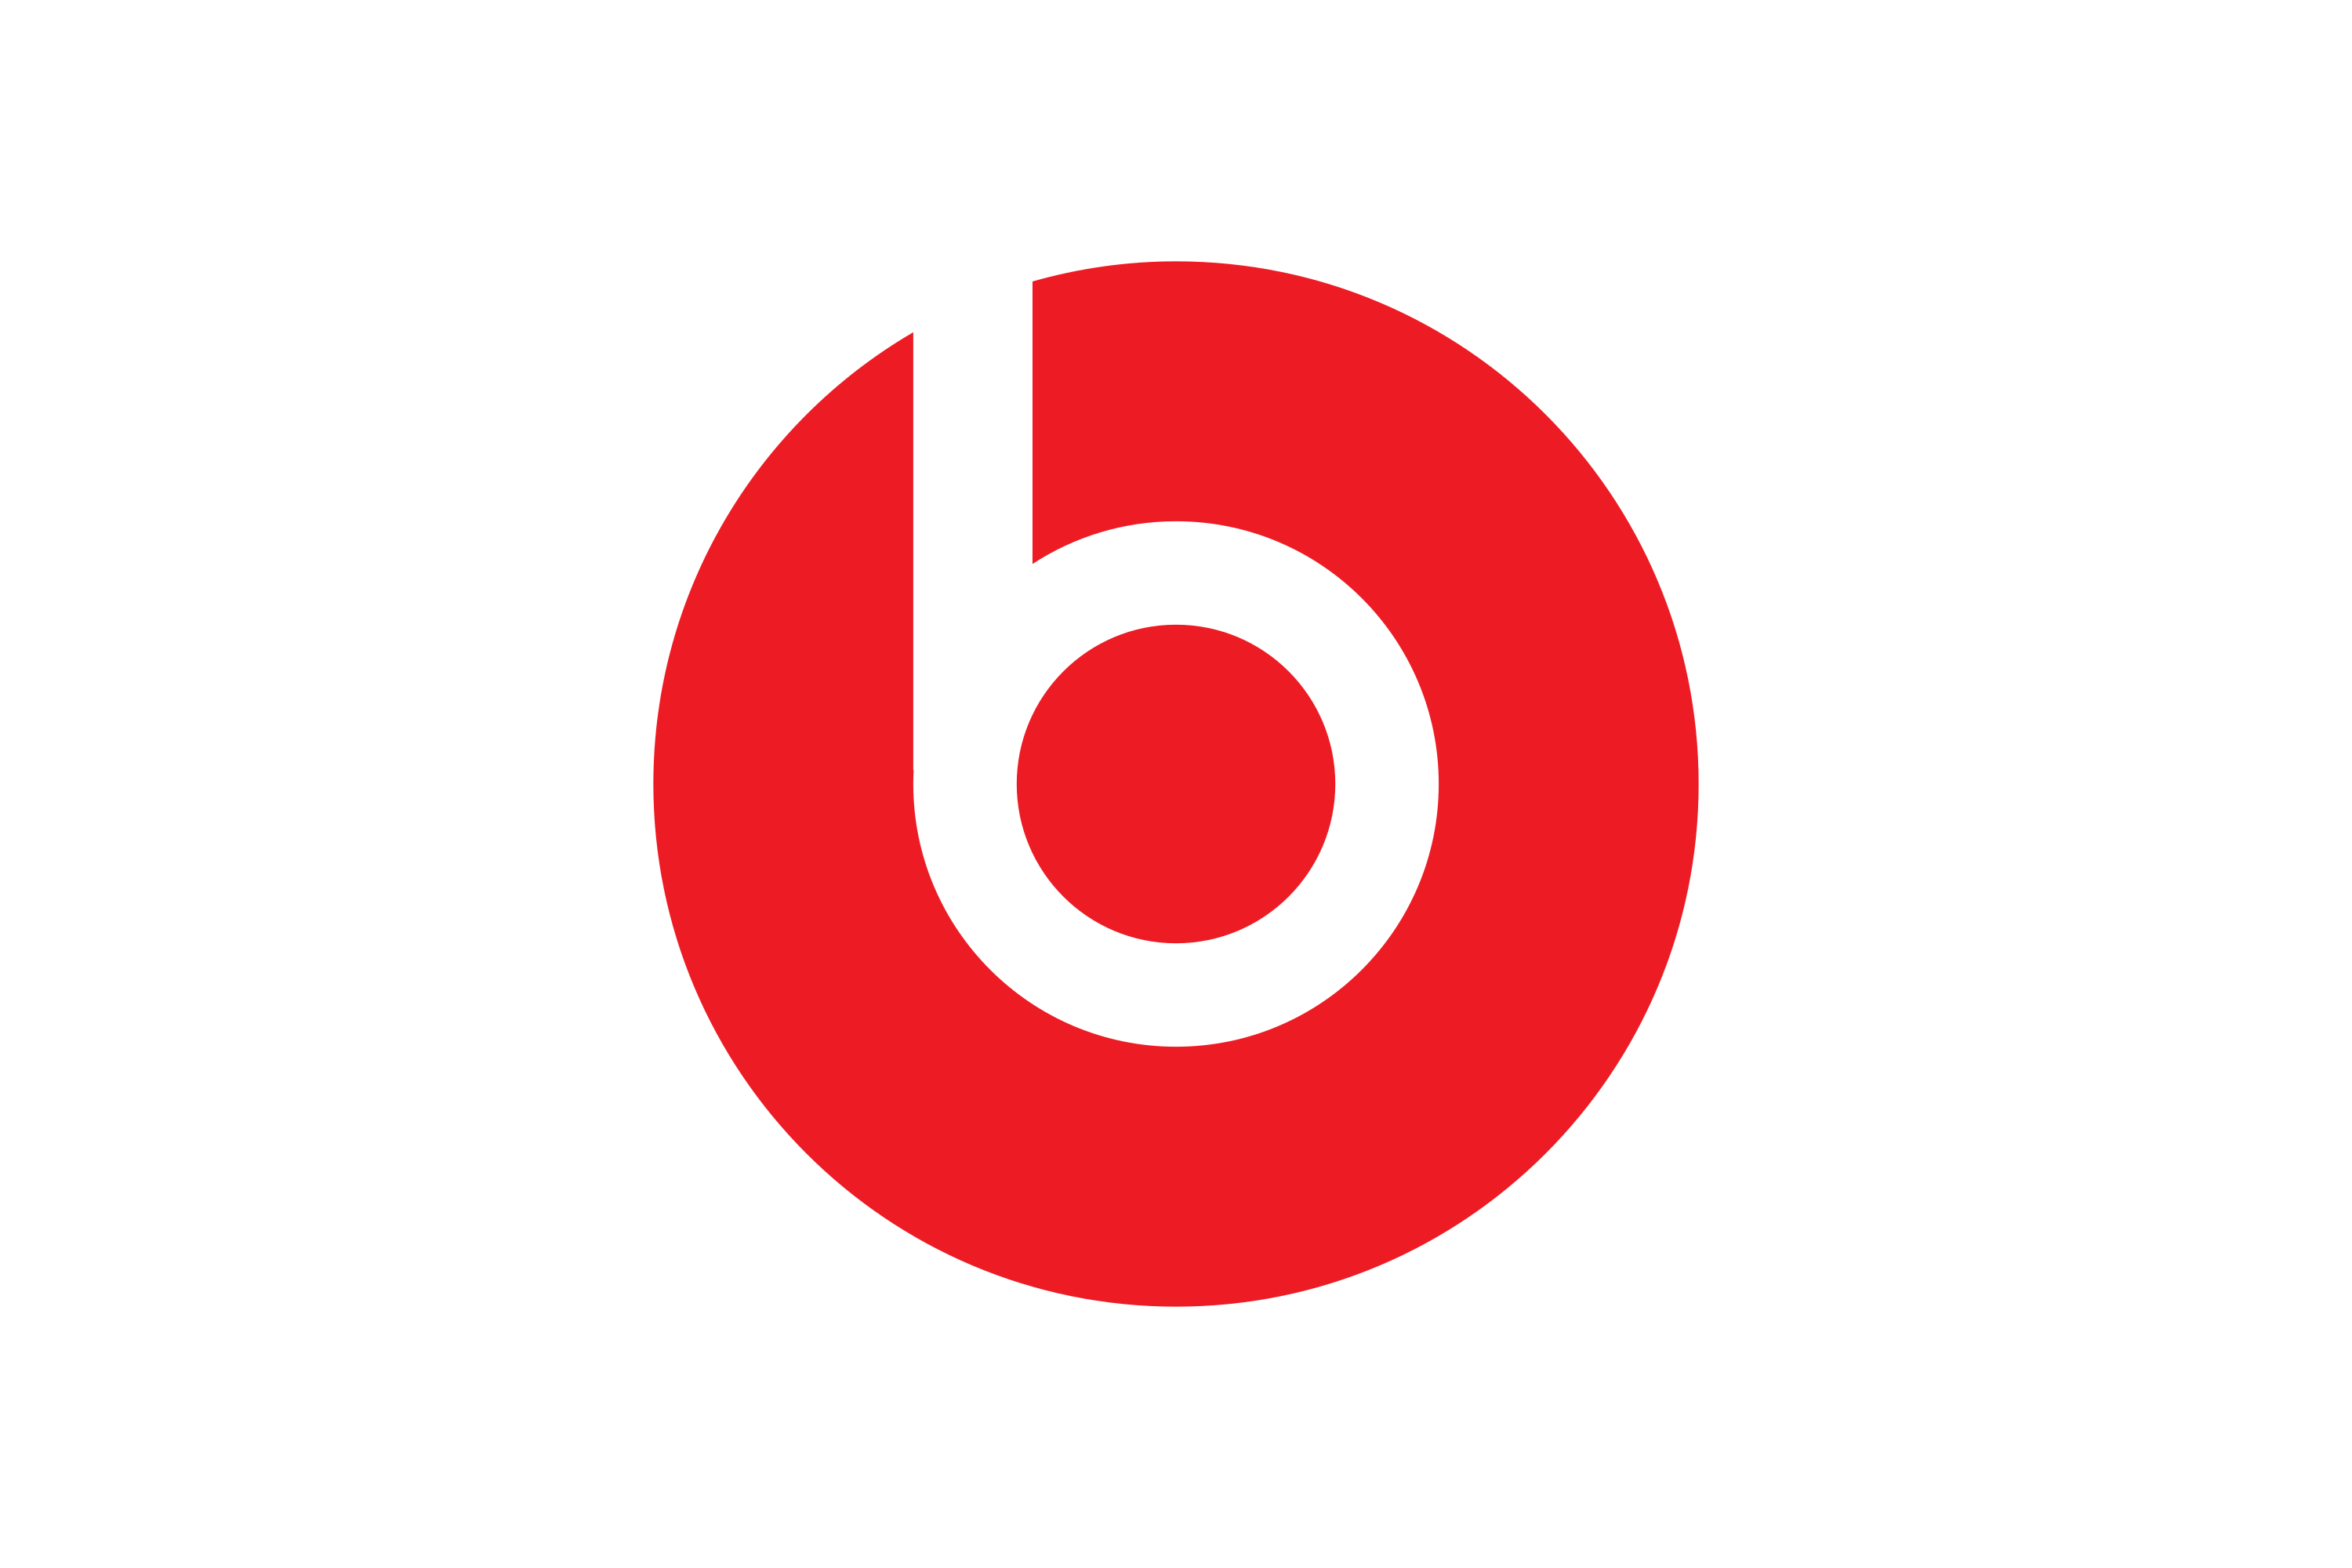 Download Beats Electronics (Beats by Dr. Dre) Logo in SVG Vector or PNG